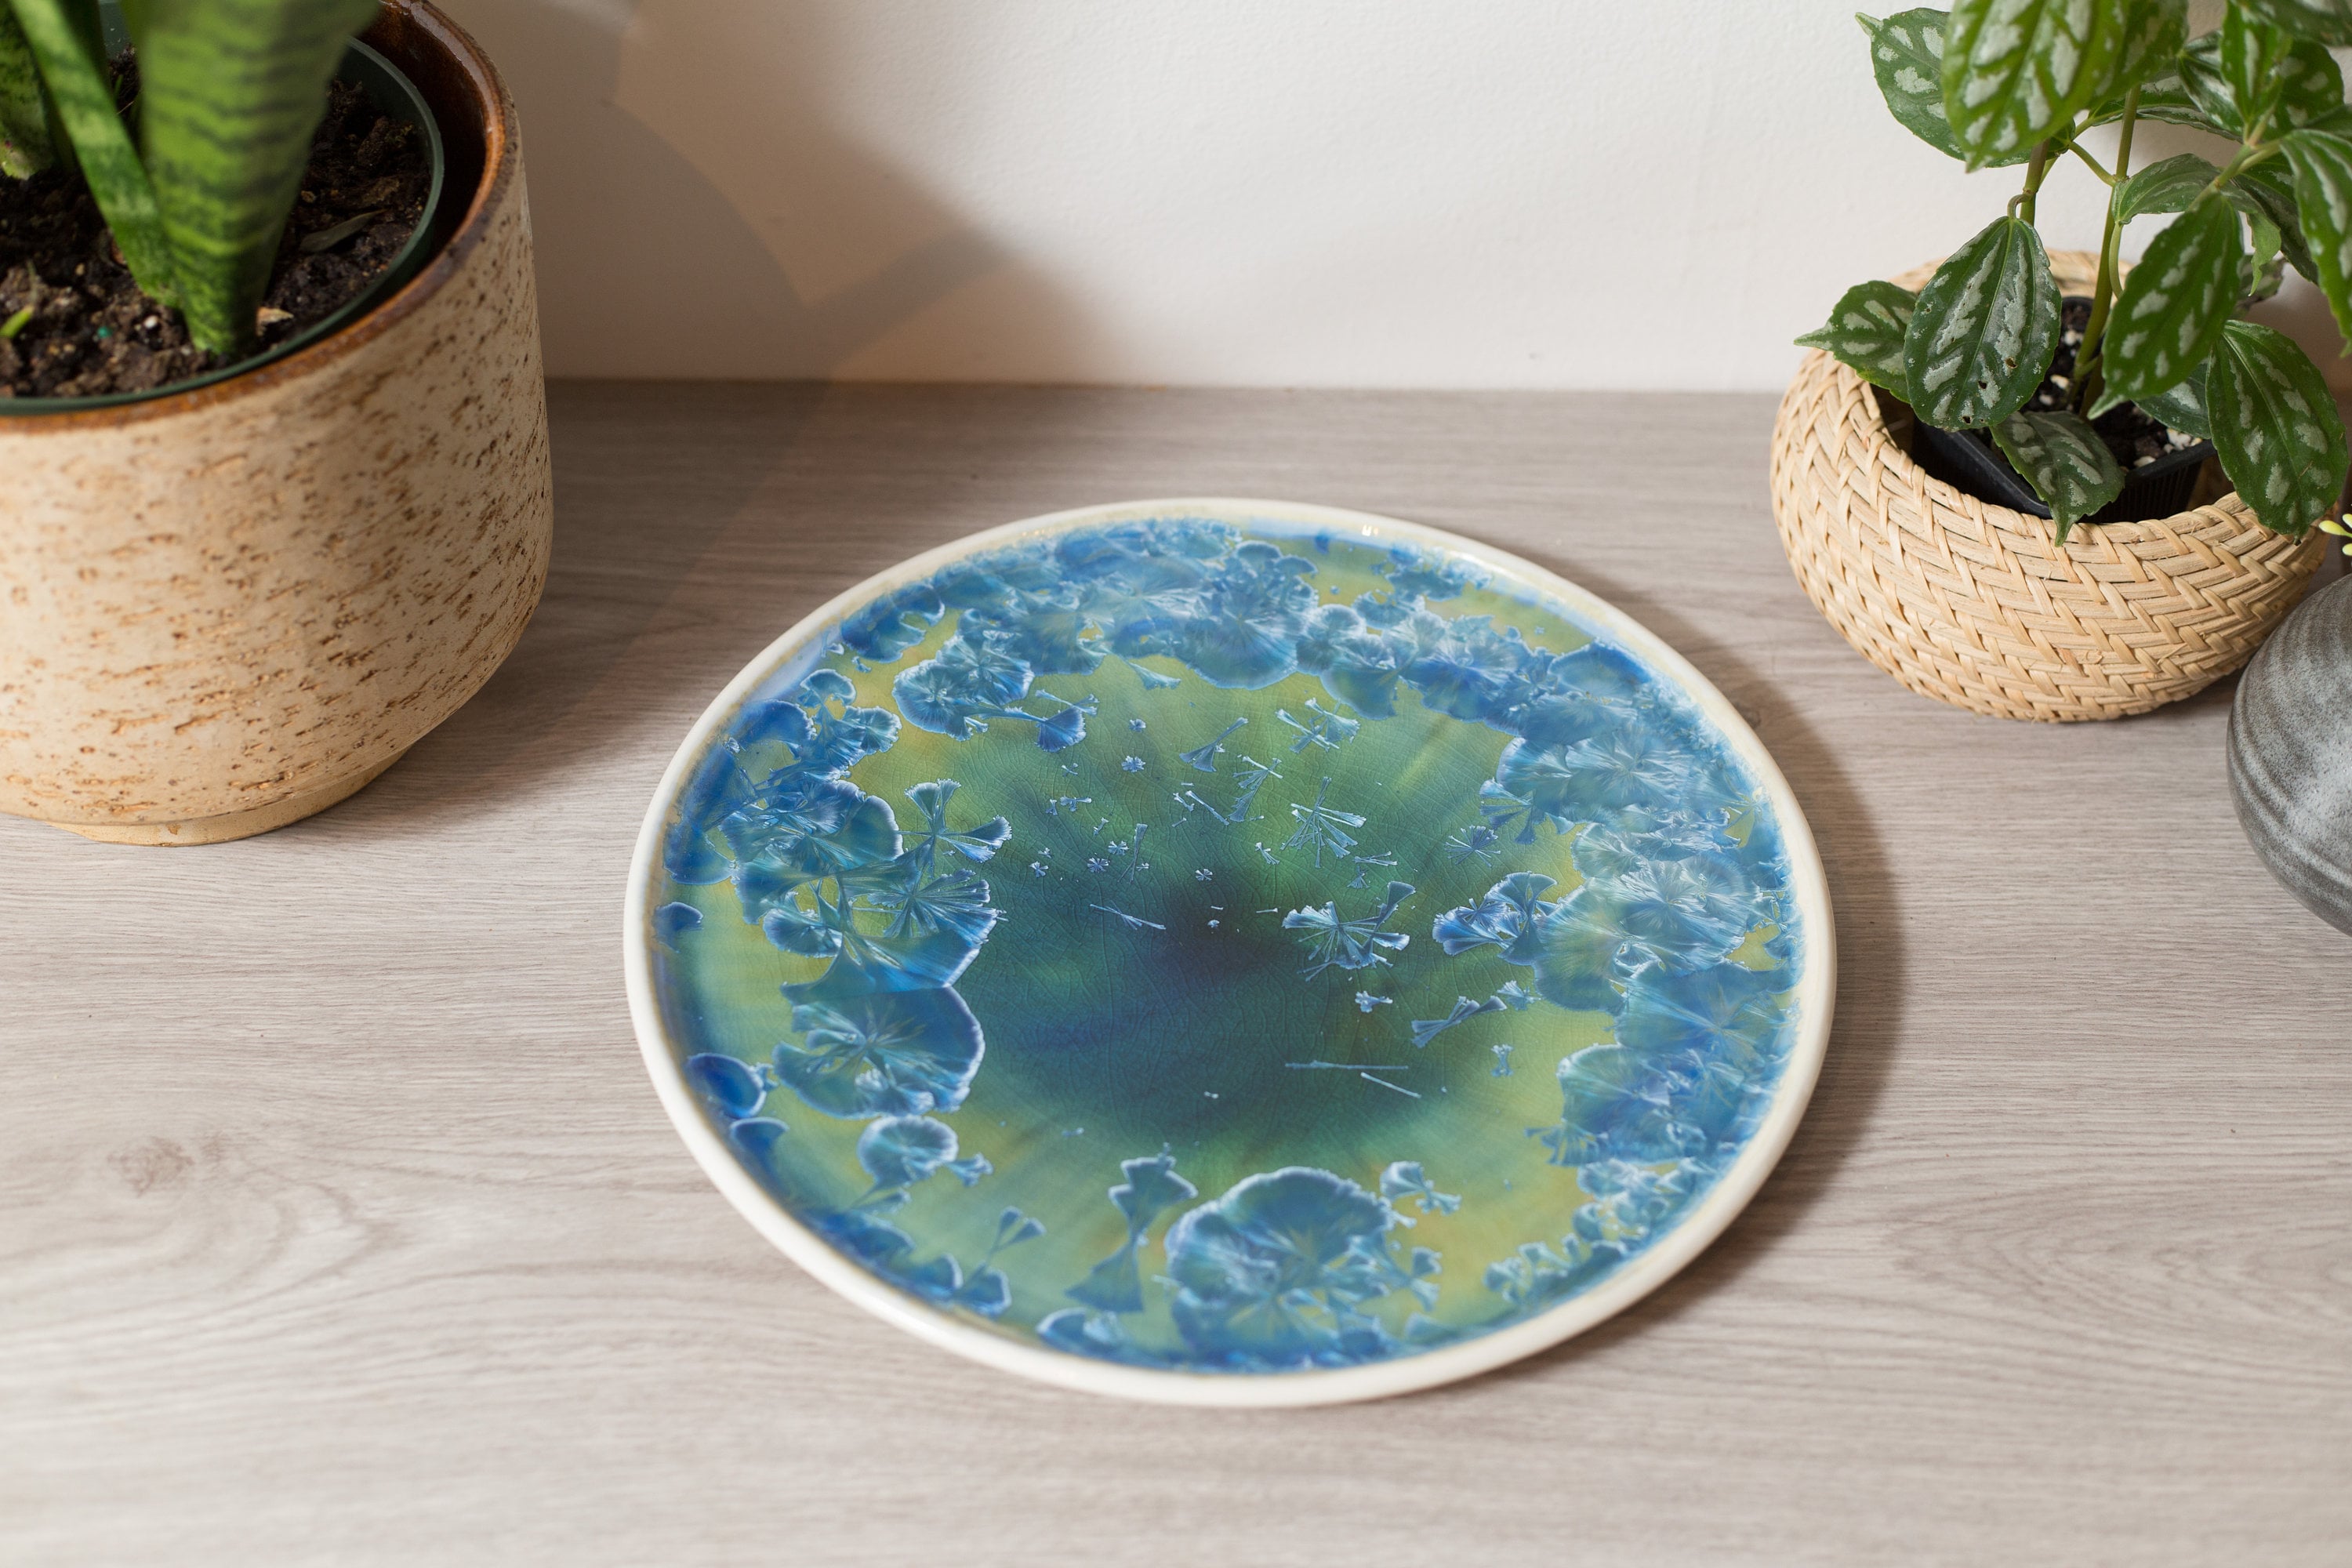 Vintage Decorative Plate Earth Ocean Planet Space Theme Decor Crackled Blue and Green Artist Hand Made Ceramic Studio Pottery Platter